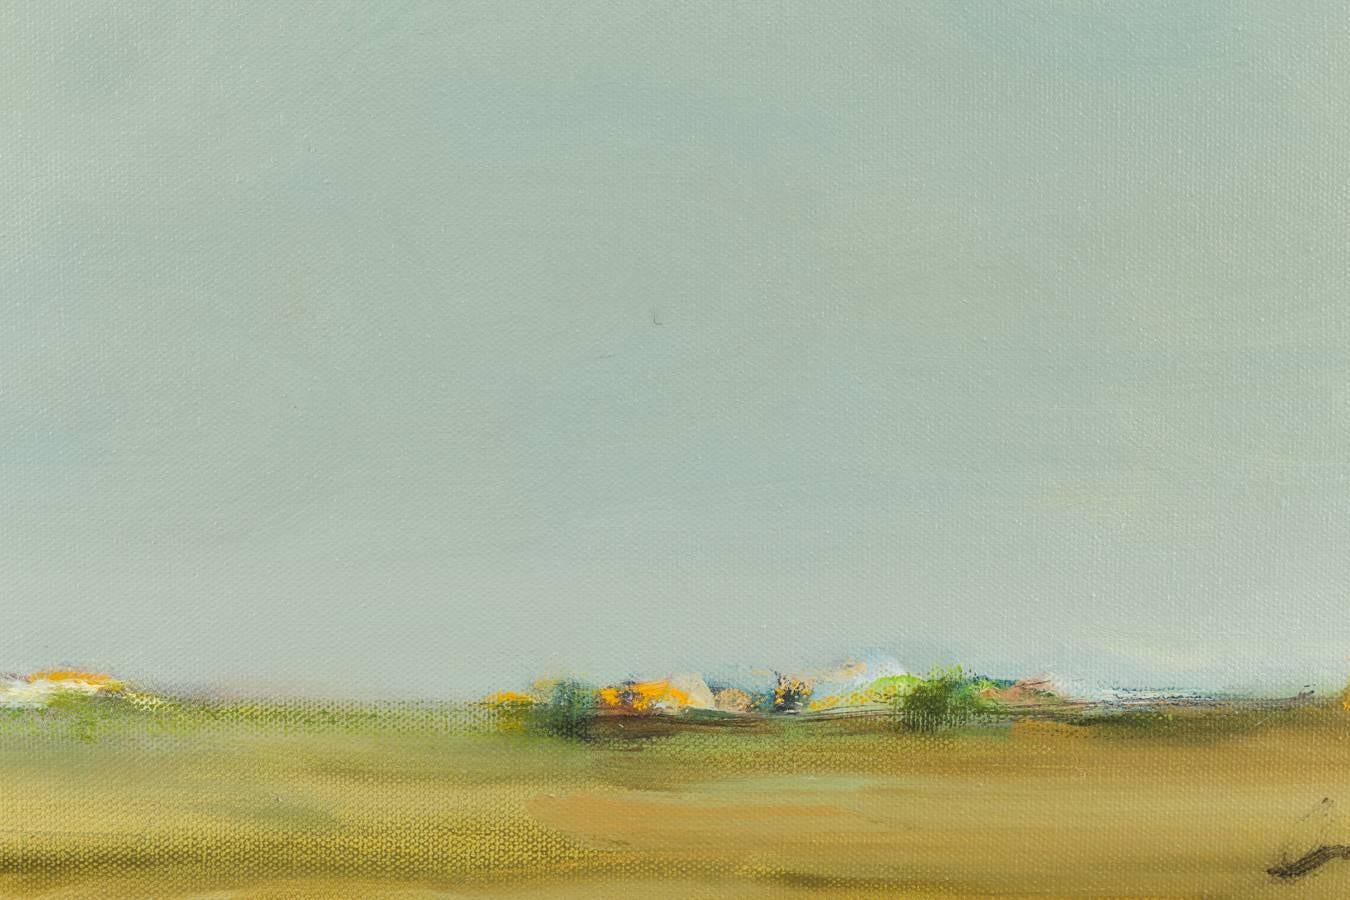 Eric Abrecht's work appears in galleries throughout the United States. Primarily working with the landscape as his subject matter, Abrecht allows the paint to develop its subject matter, rather than working from or recreating a specific scene. By